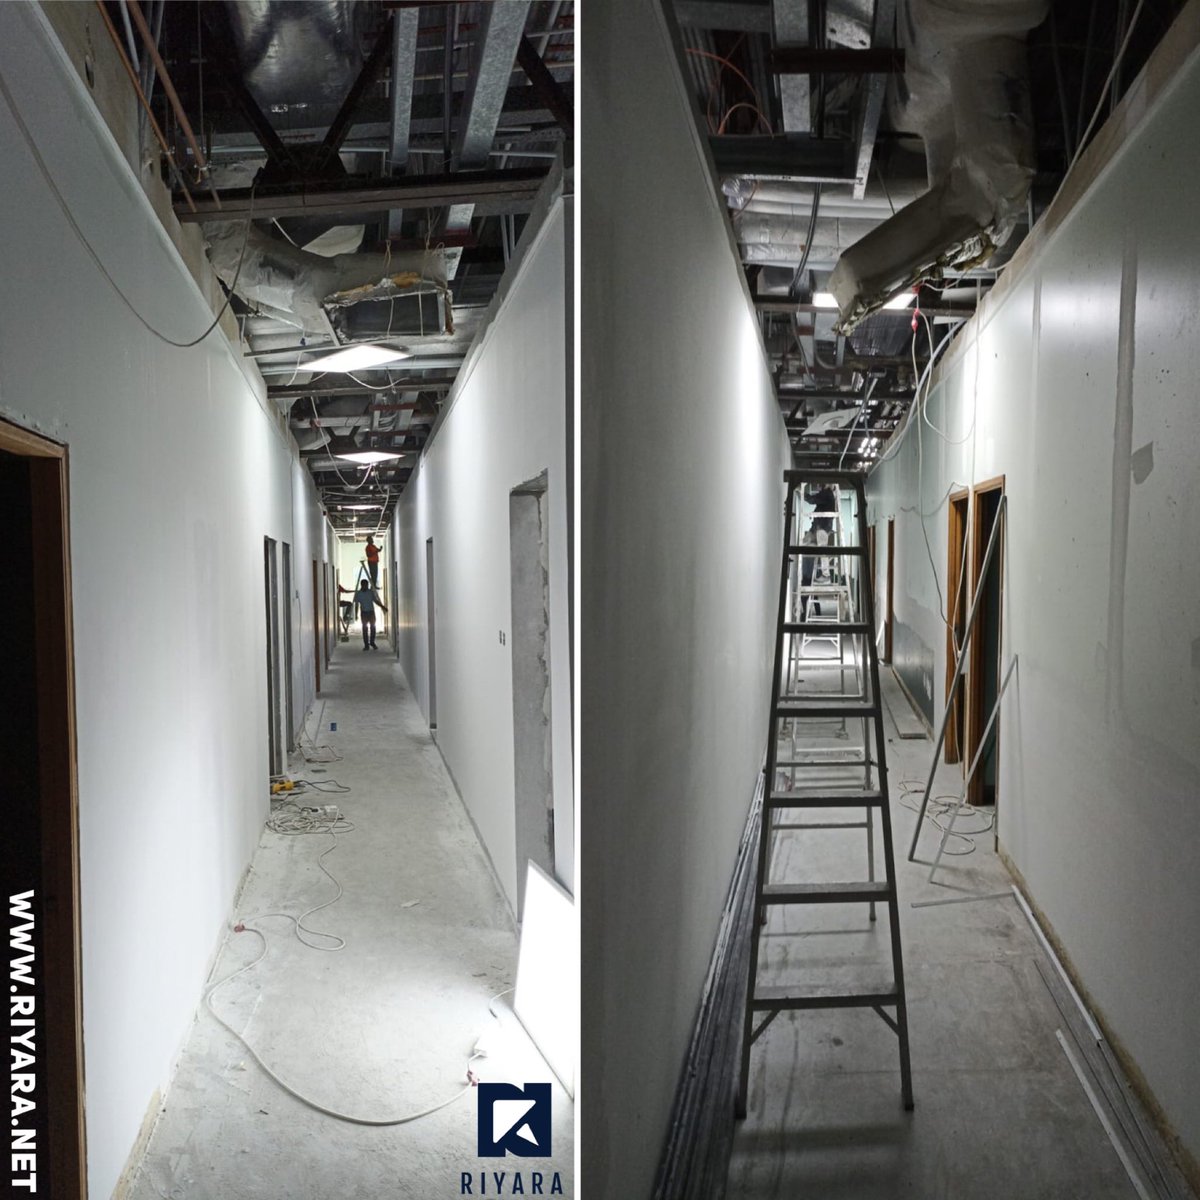 A regular sight for our team on site as civil and MEP works continue for our ongoing medical facility project. 
Completed images to be shared soon. 

#civil #mep #civilengineering #mepengineering #interior #fitout #media #branding #fitoutinteriors #riyara #riyarabh